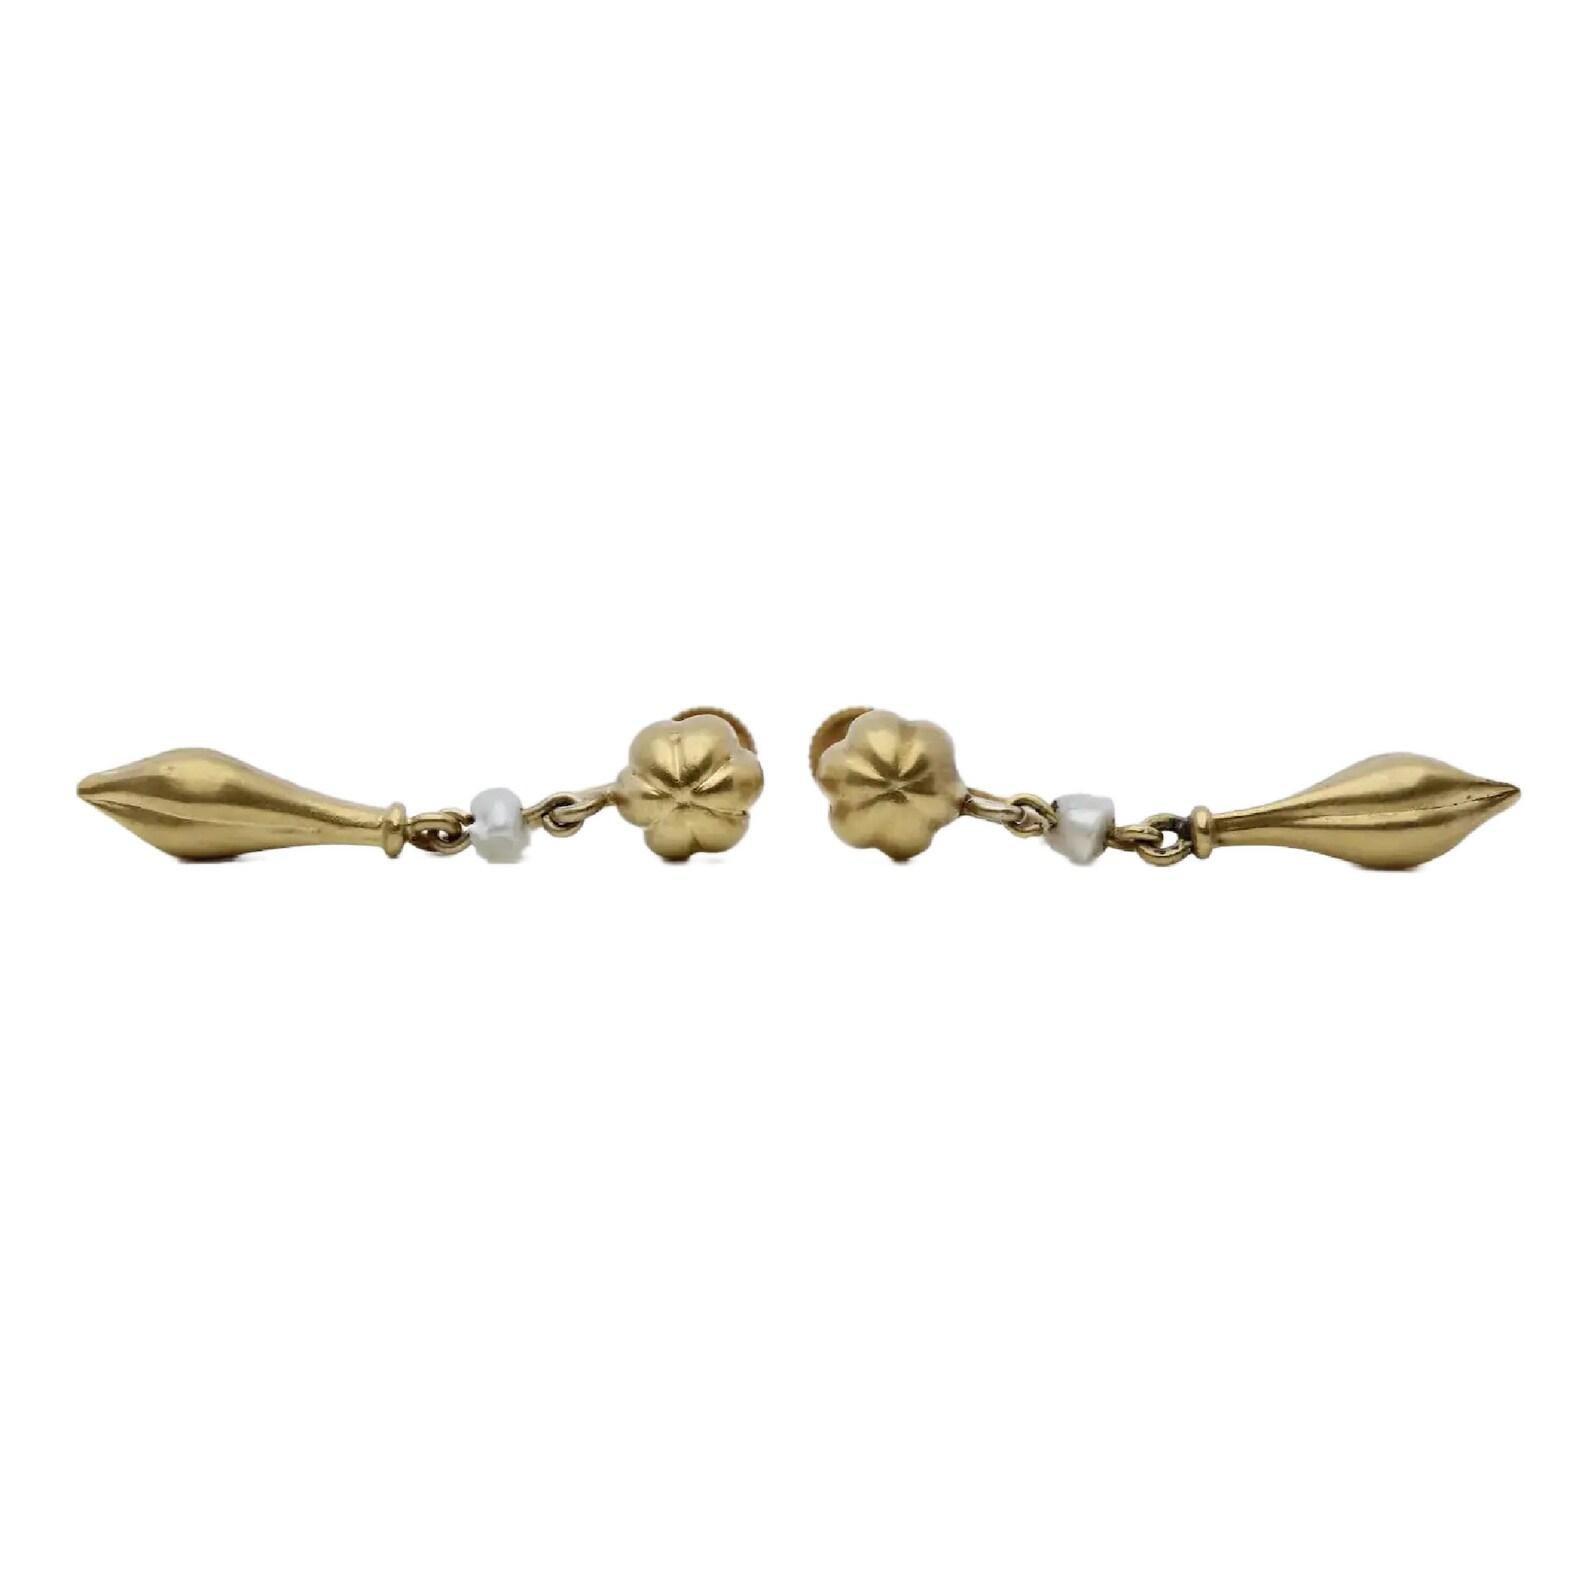 A pair of victorian period, Etruscan revival earrings in 14 karat yellow gold. Featuring a tufted yellow gold bead at top from which suspends a natural pearl, and a yellow gold urn. Measuring 3mm wide, the pearls are of natural salt water